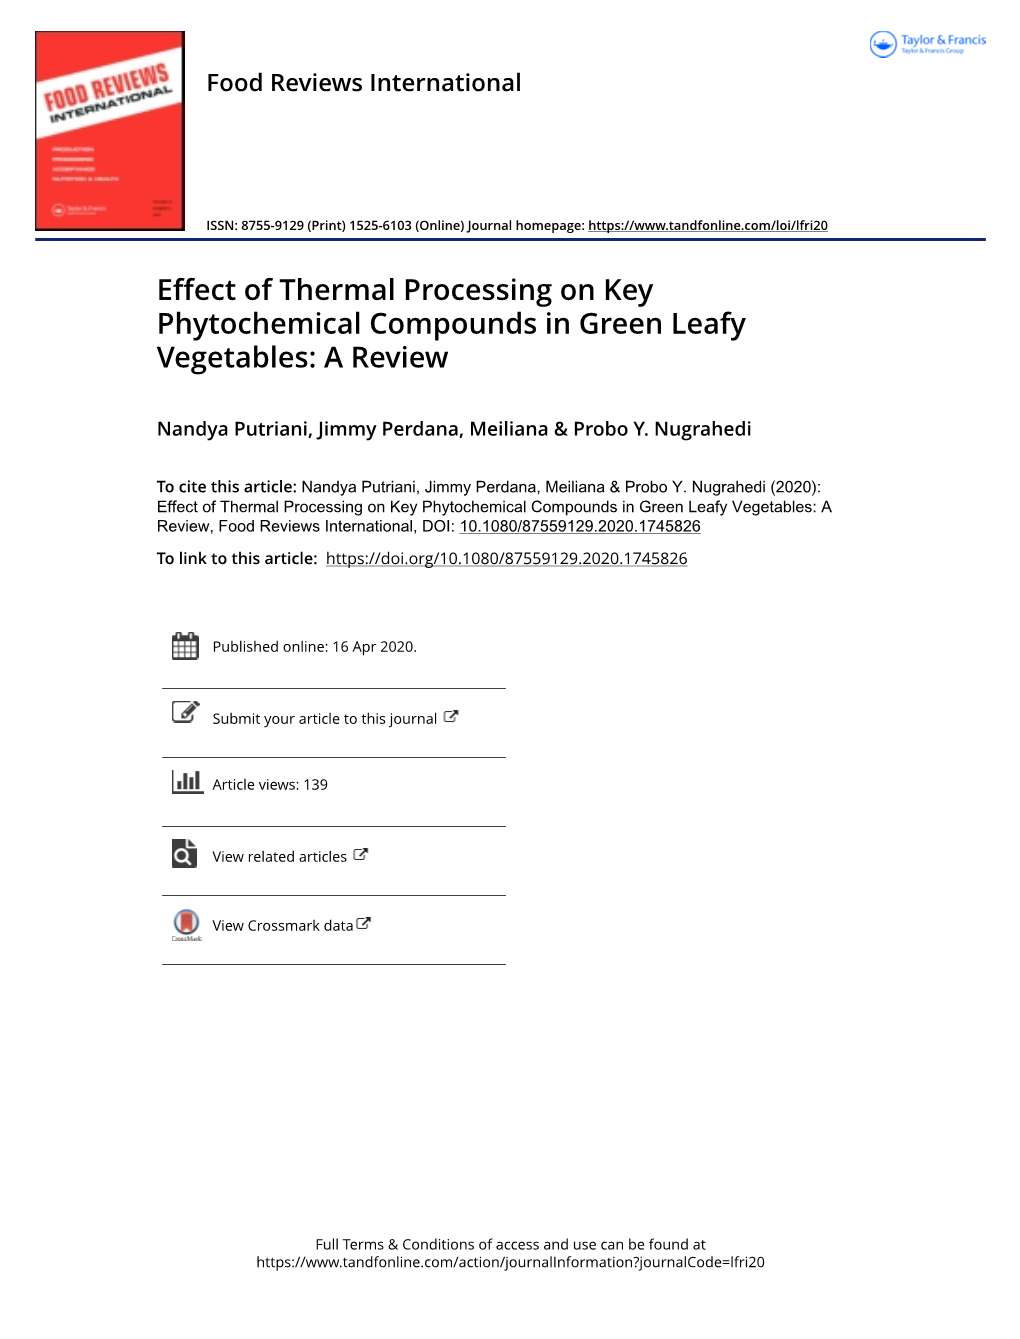 Effect of Thermal Processing on Key Phytochemical Compounds in Green Leafy Vegetables: a Review